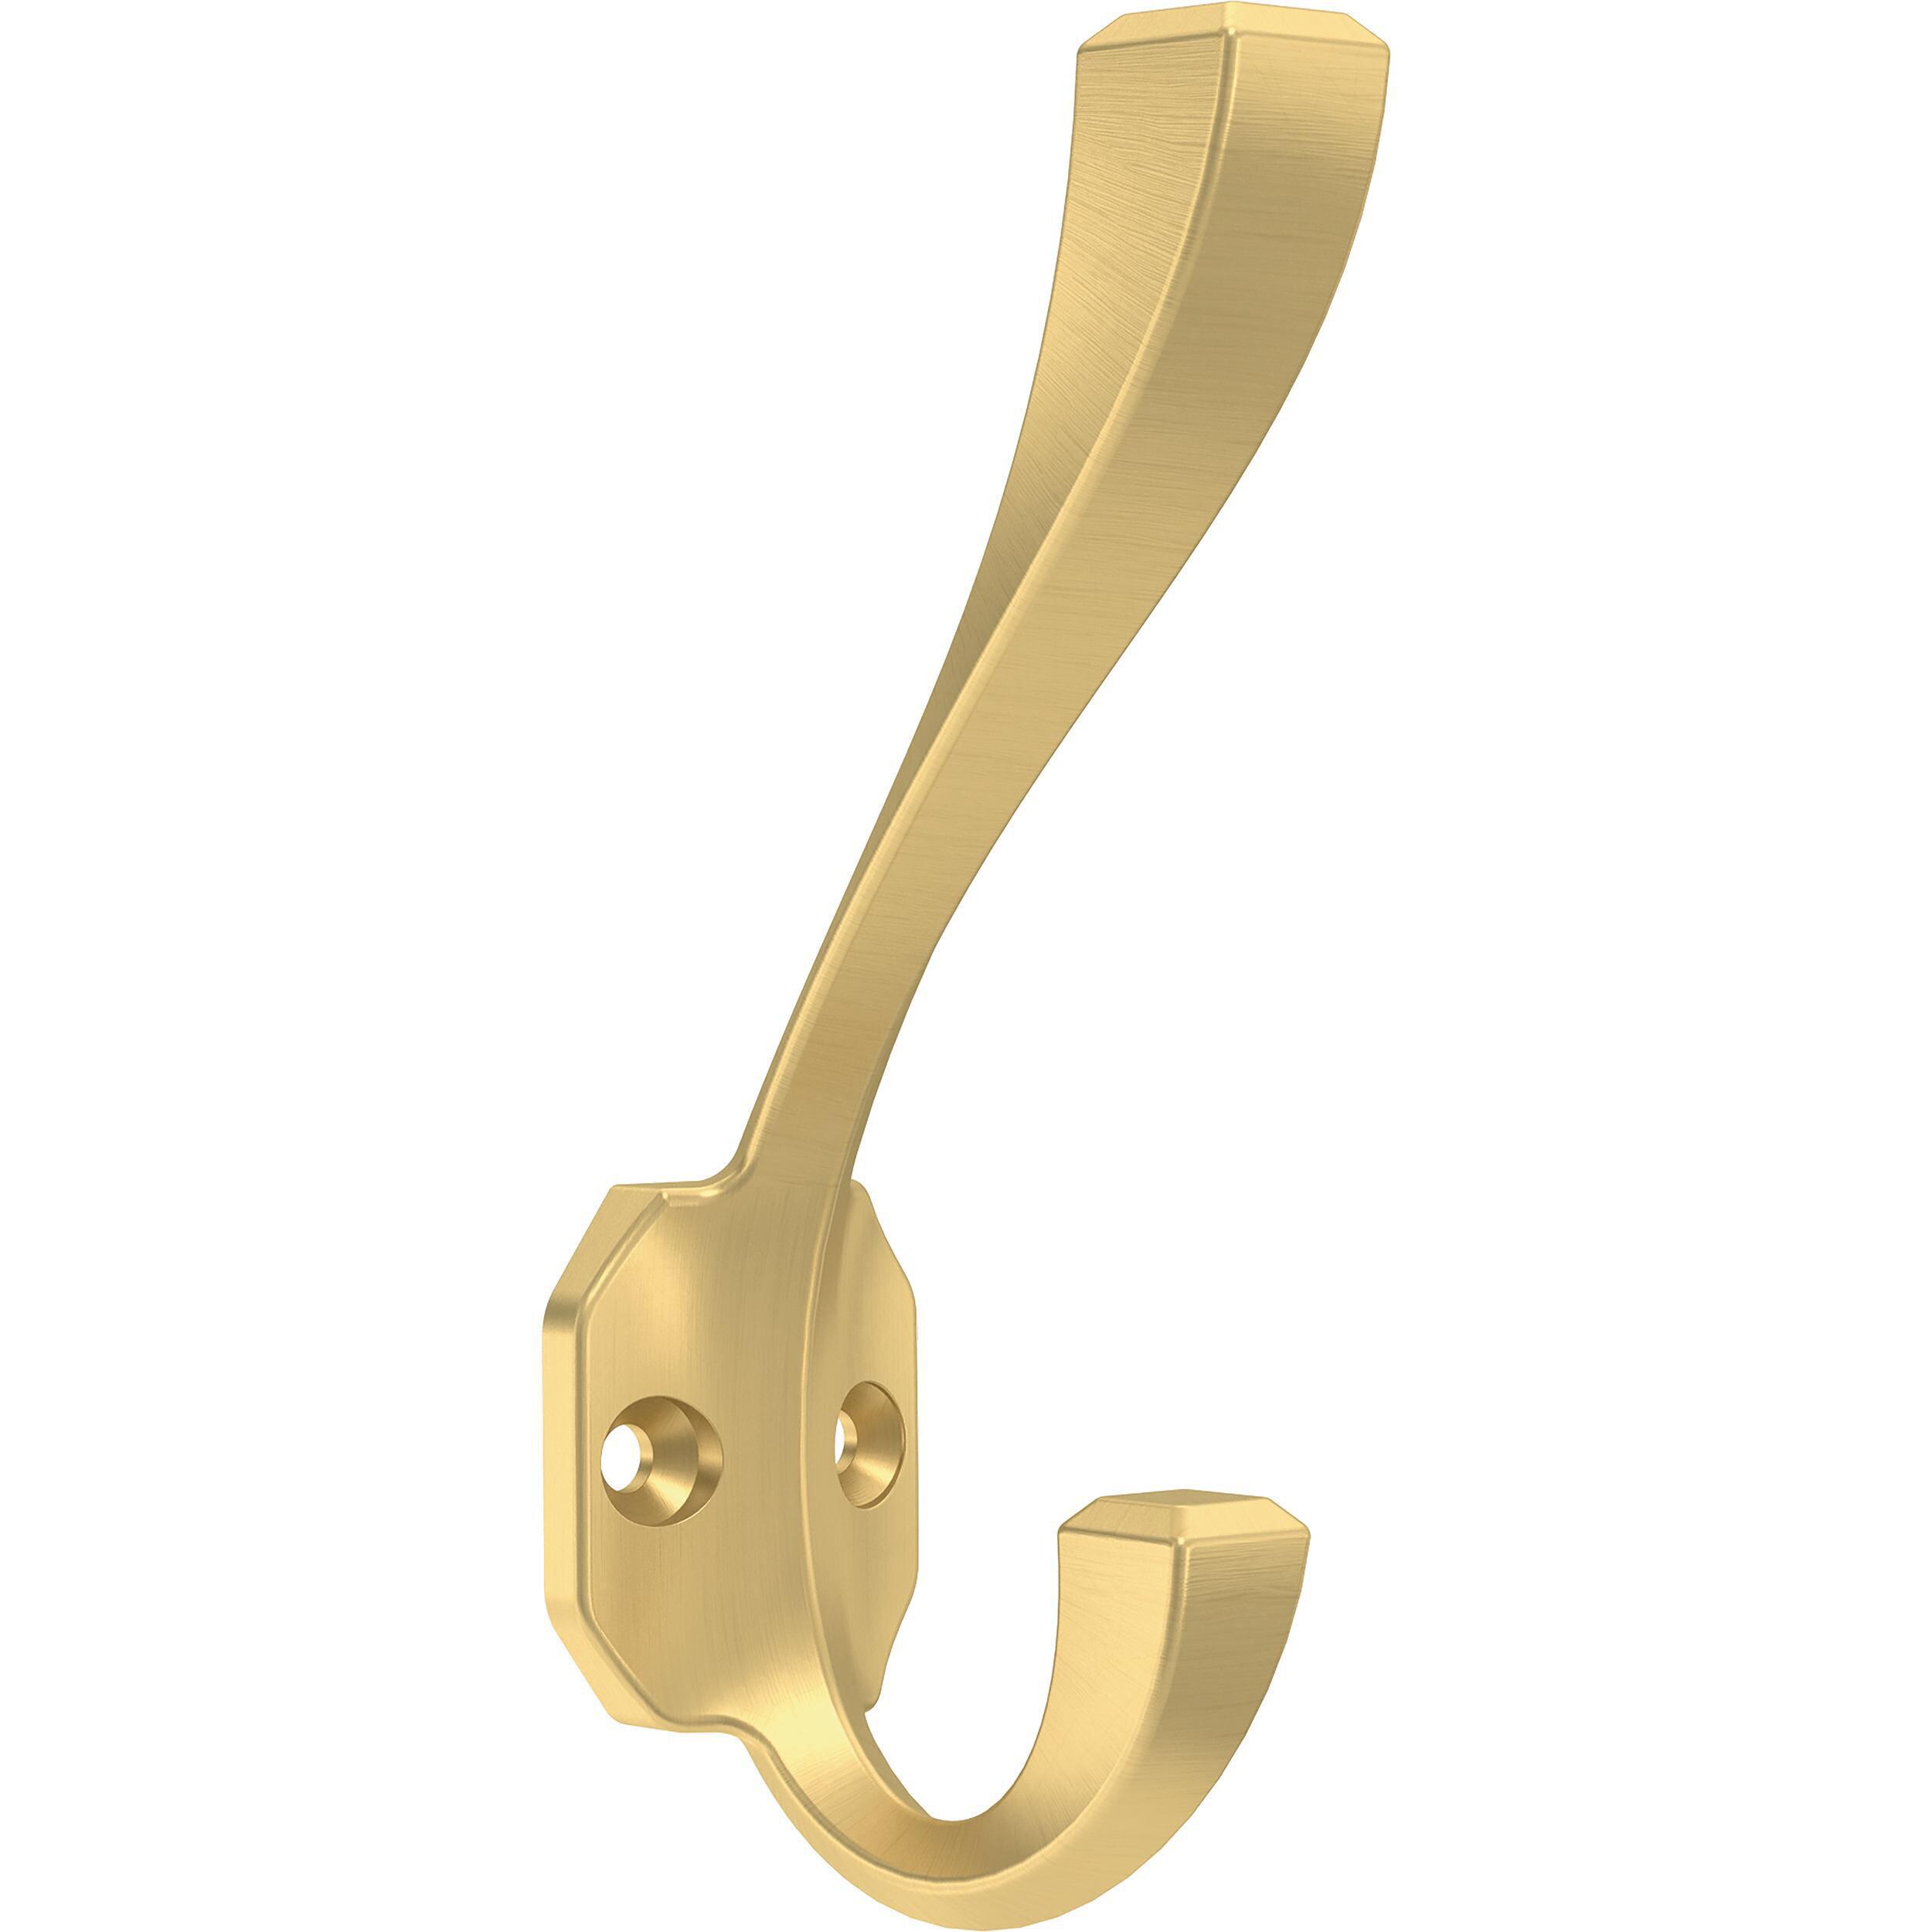 Franklin Brass B47254K-117-C Napier 4-6/8 in. Coat and Hat Wall Hooks in Modern Gold (4-Pack)